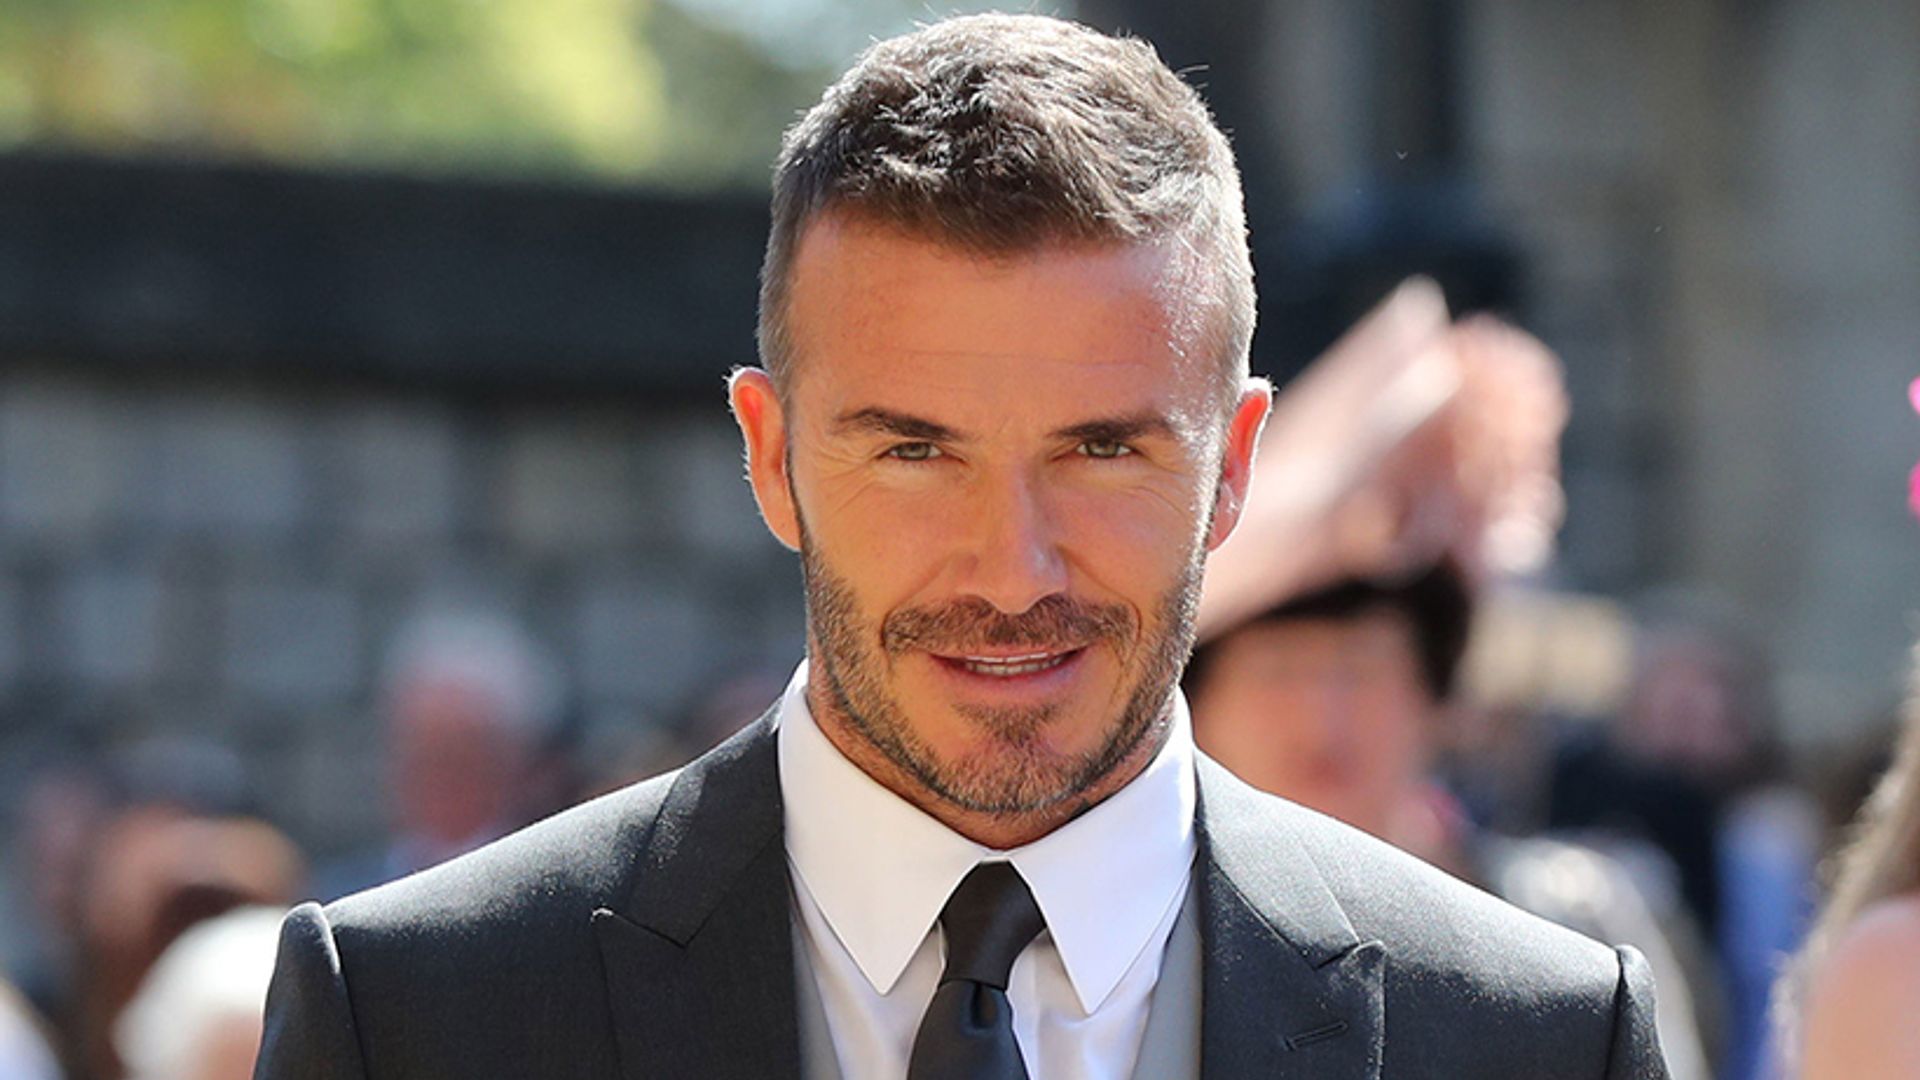 David Beckham faces speeding charge in London | HELLO!